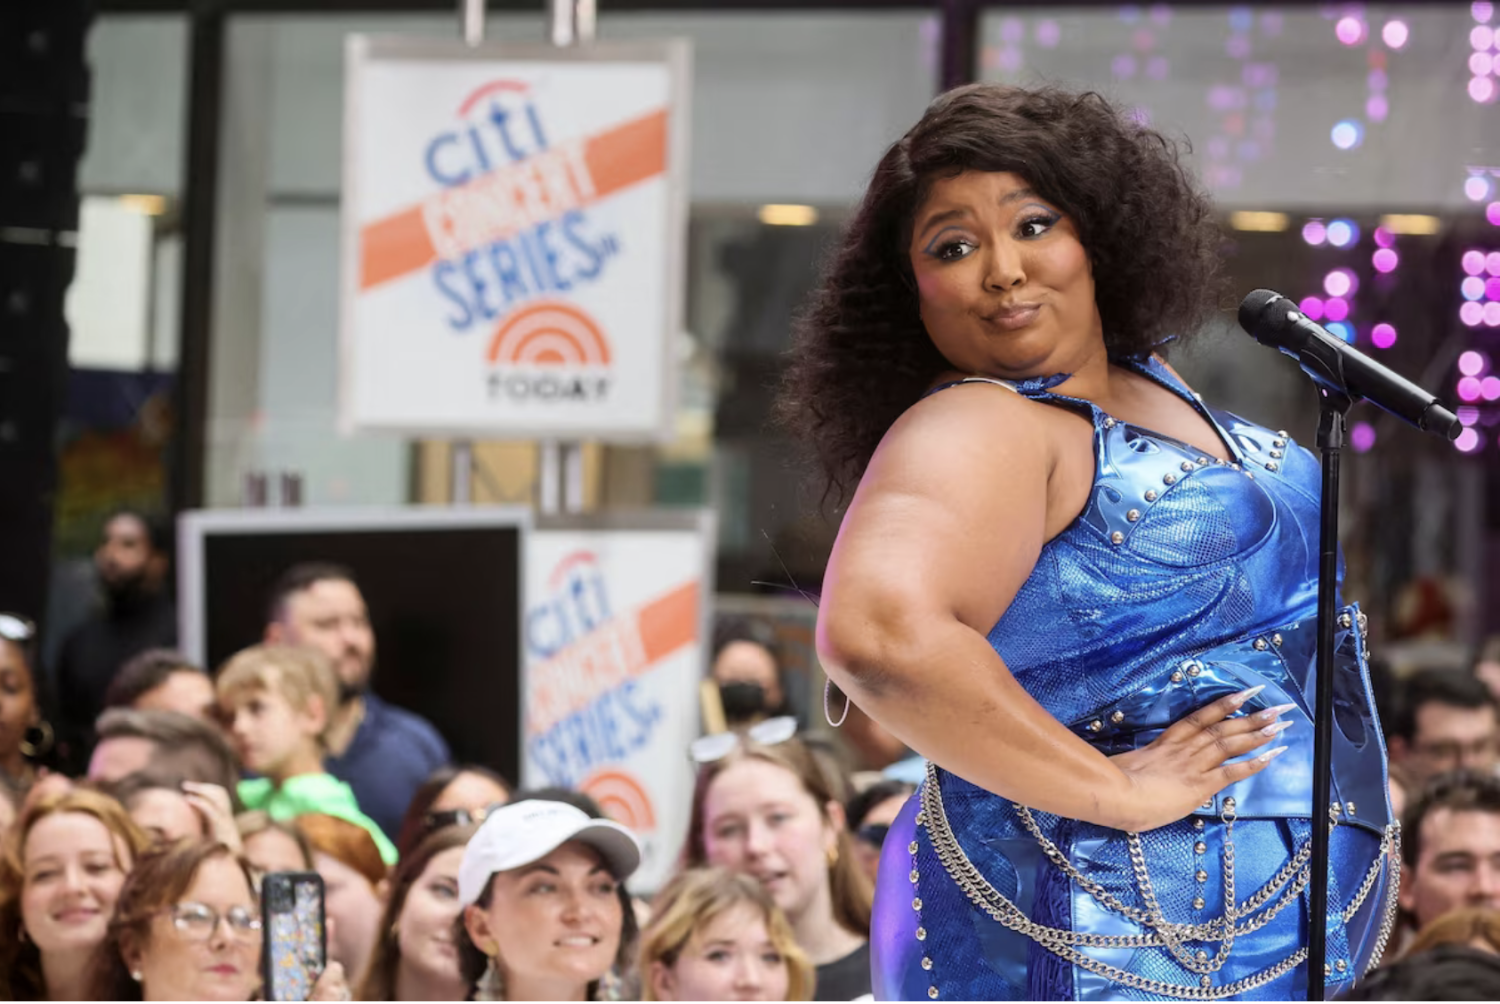 Singer Lizzo performs on NBC's “Today” show in New York on July 15, 2022. (Brendan McDermid/Reuters)